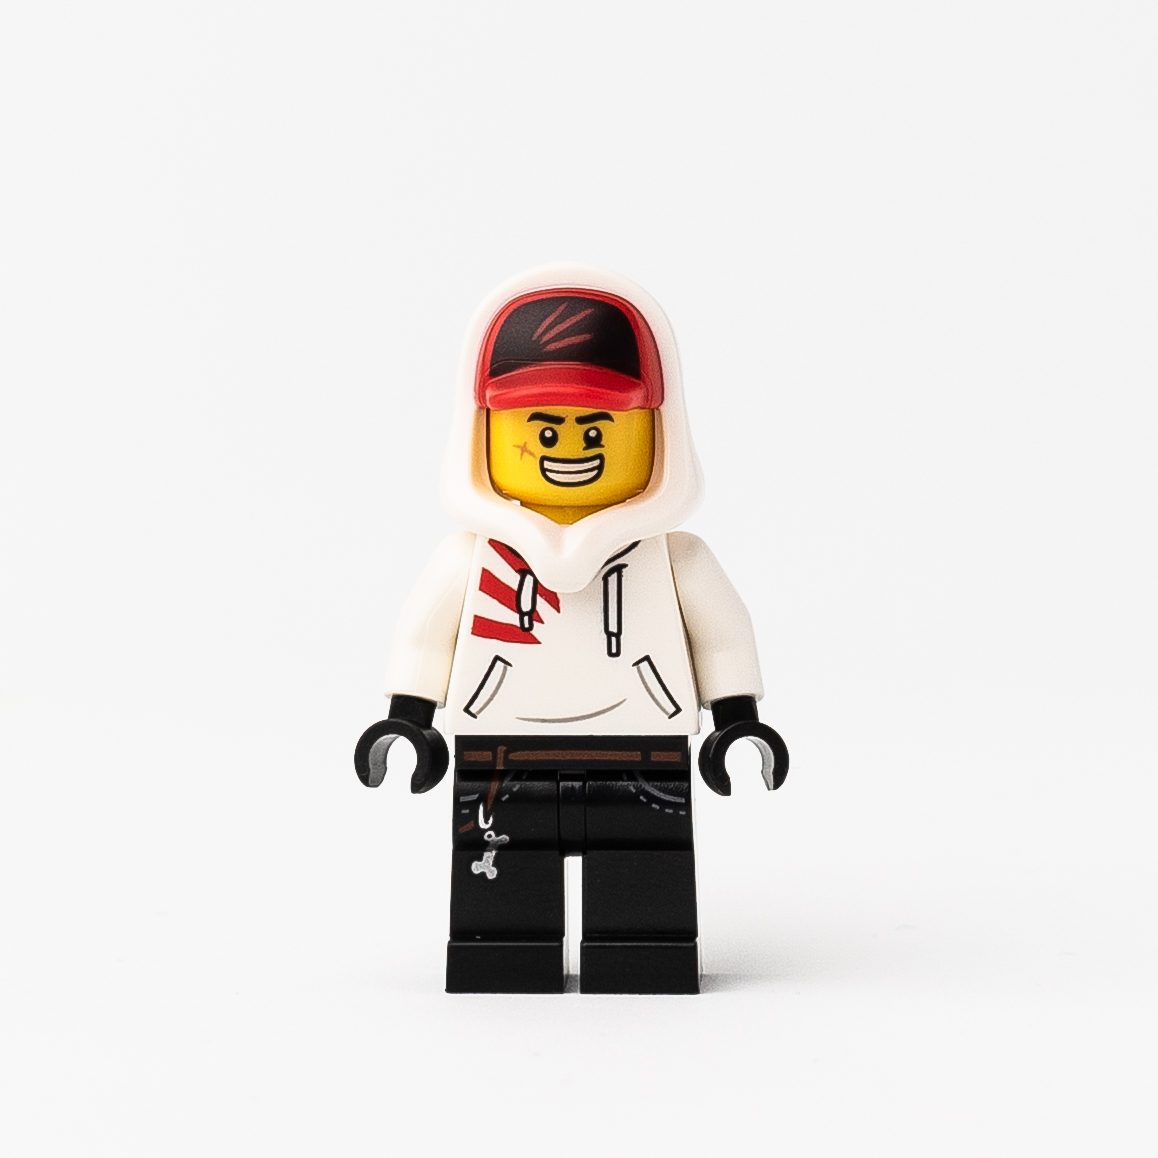 New LEGO Jack - – and Cap Minifigure (hs - Hood Hoodie StudBee with White Davids